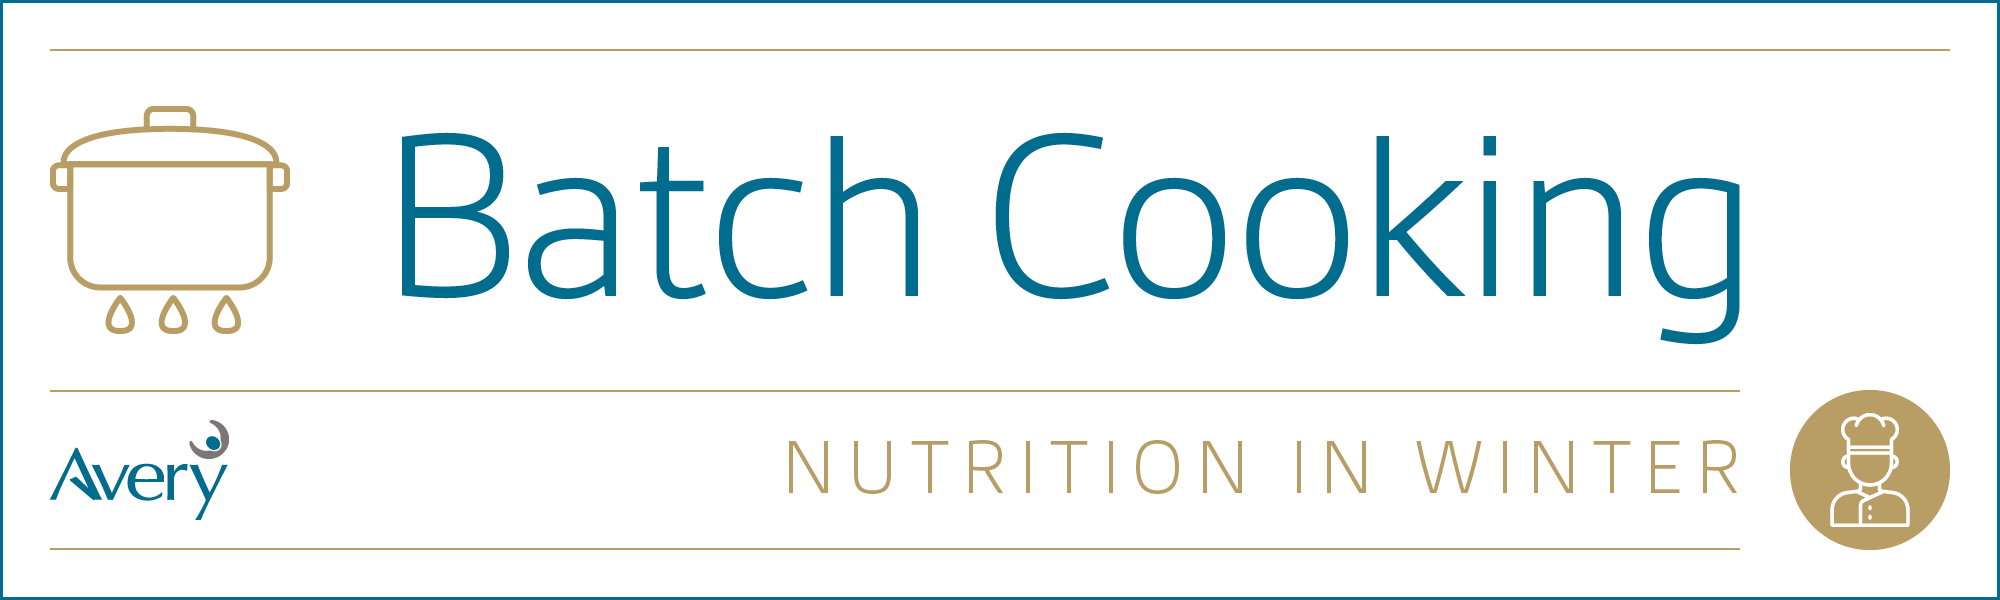 Nutrition in Winter Batch Cooking Banner